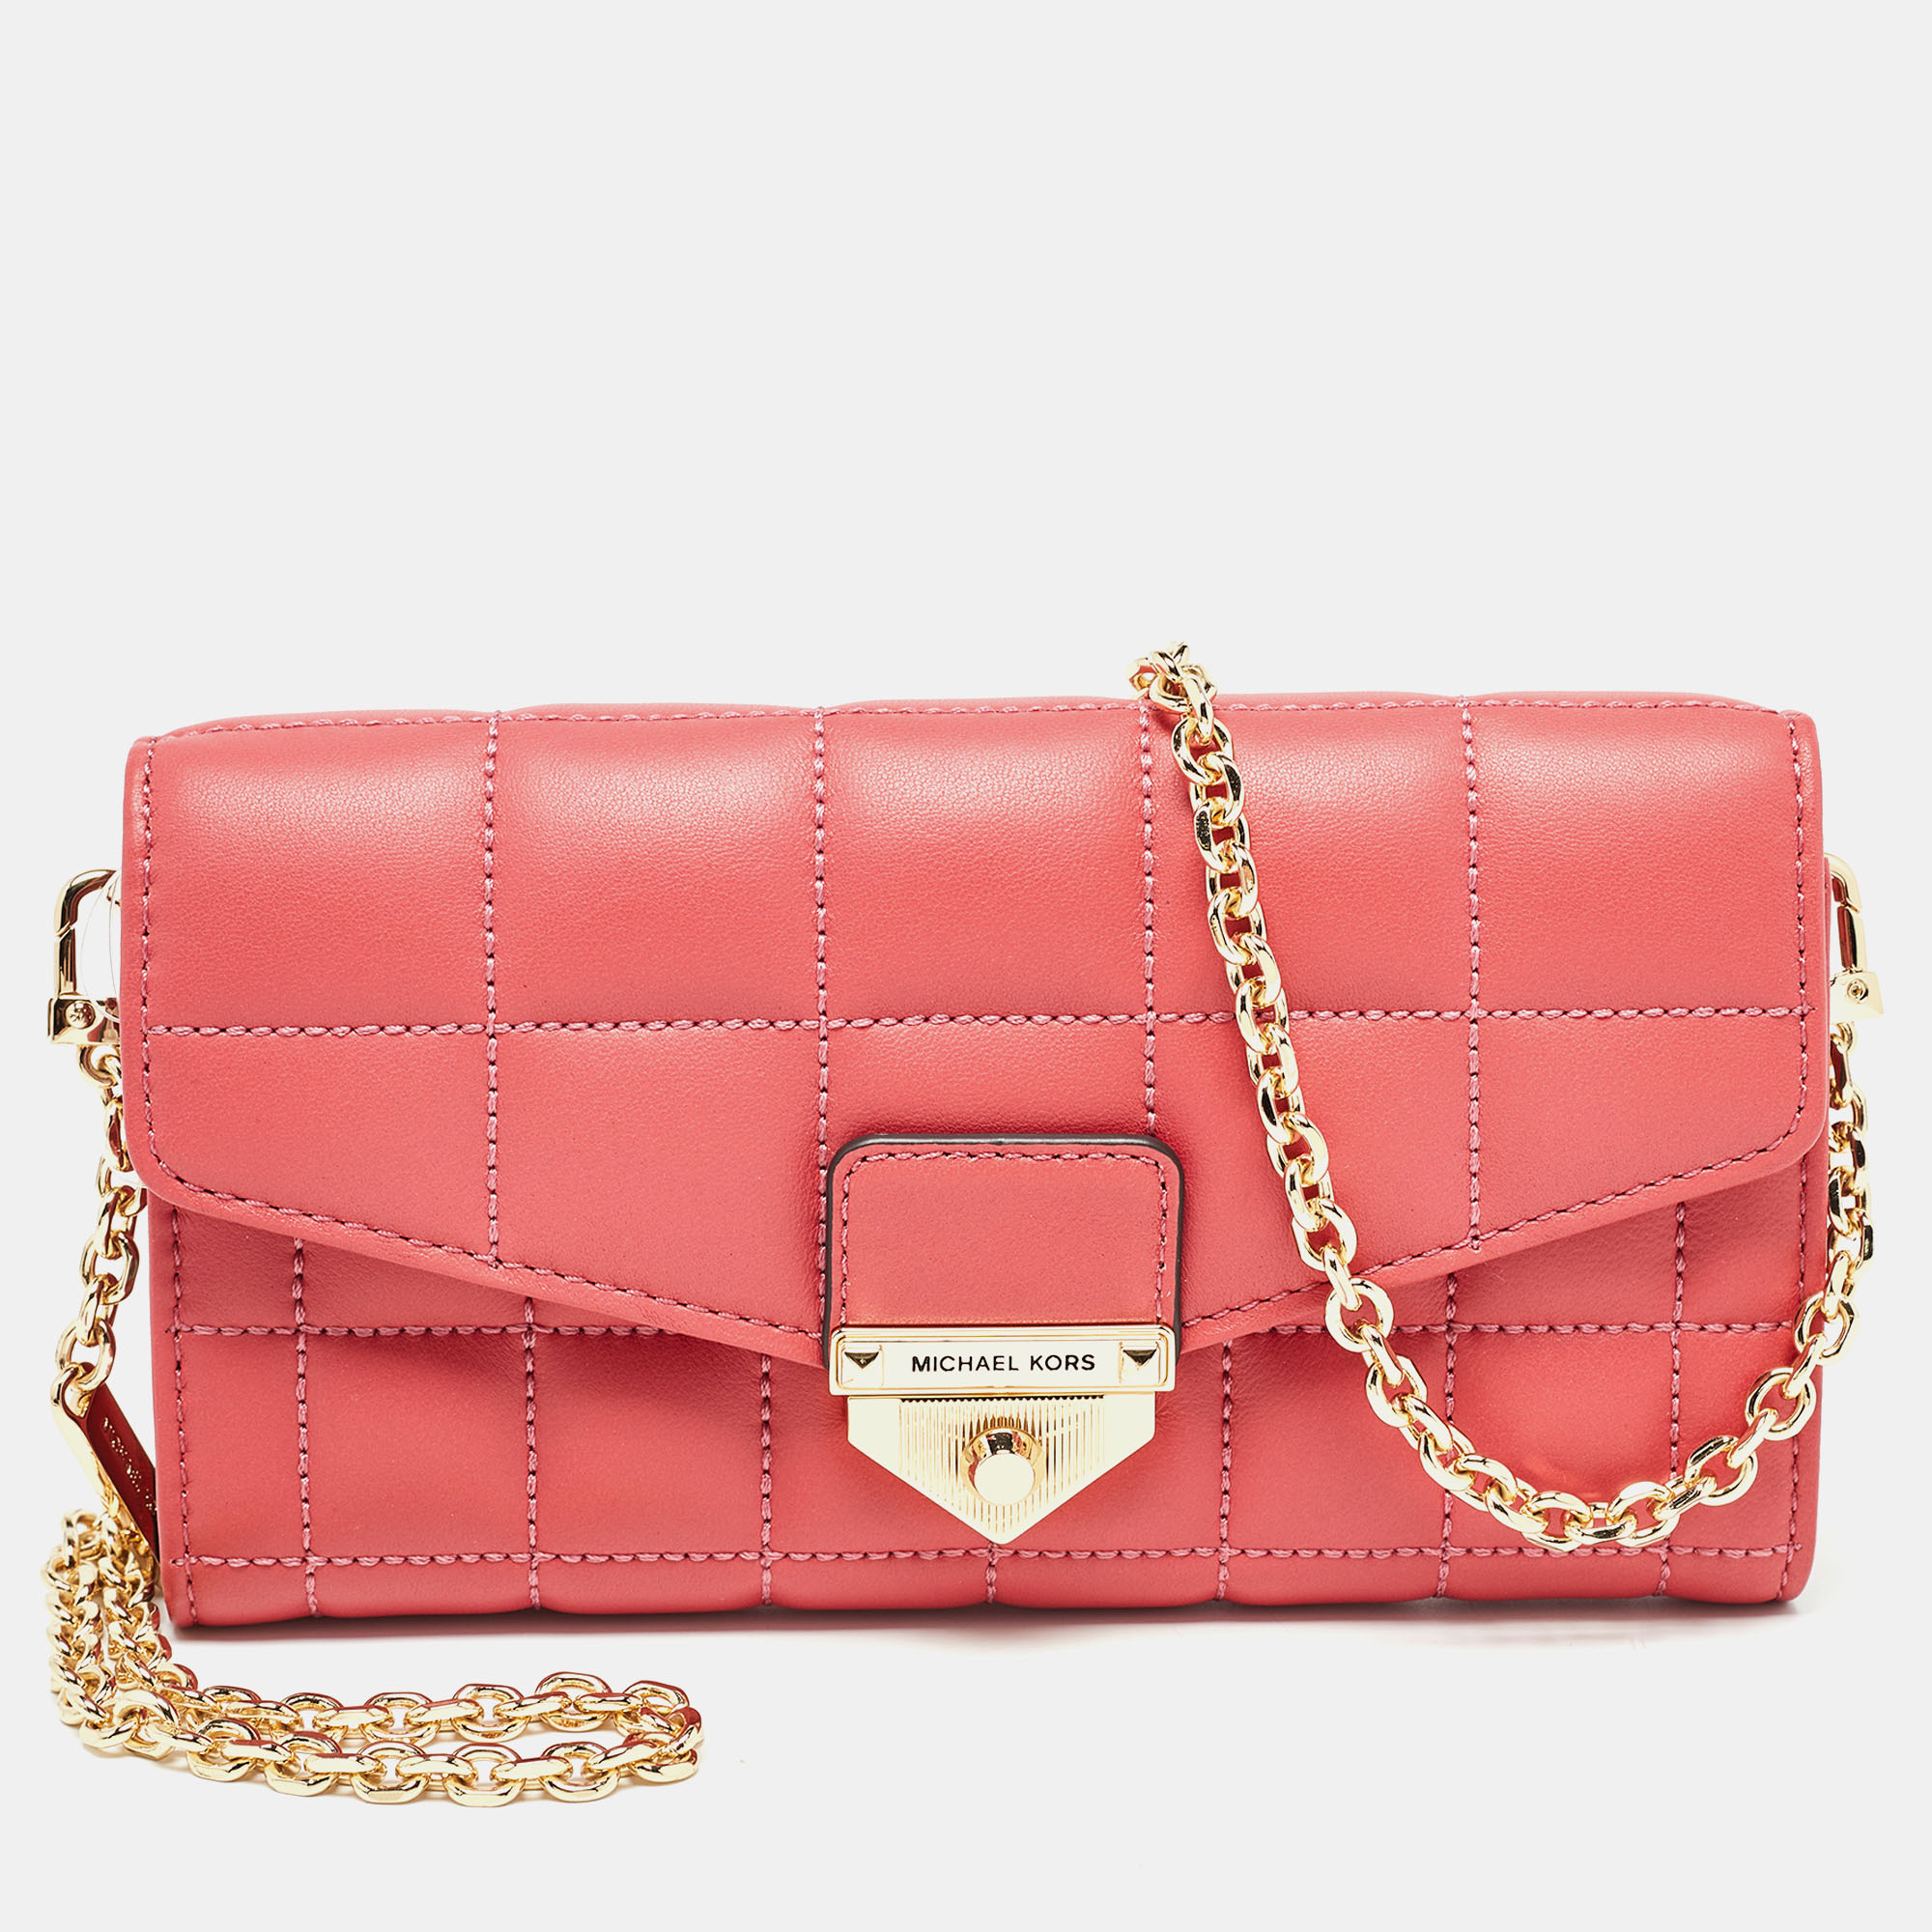 Michael kors rose red quilted leather large soho wallet on chain